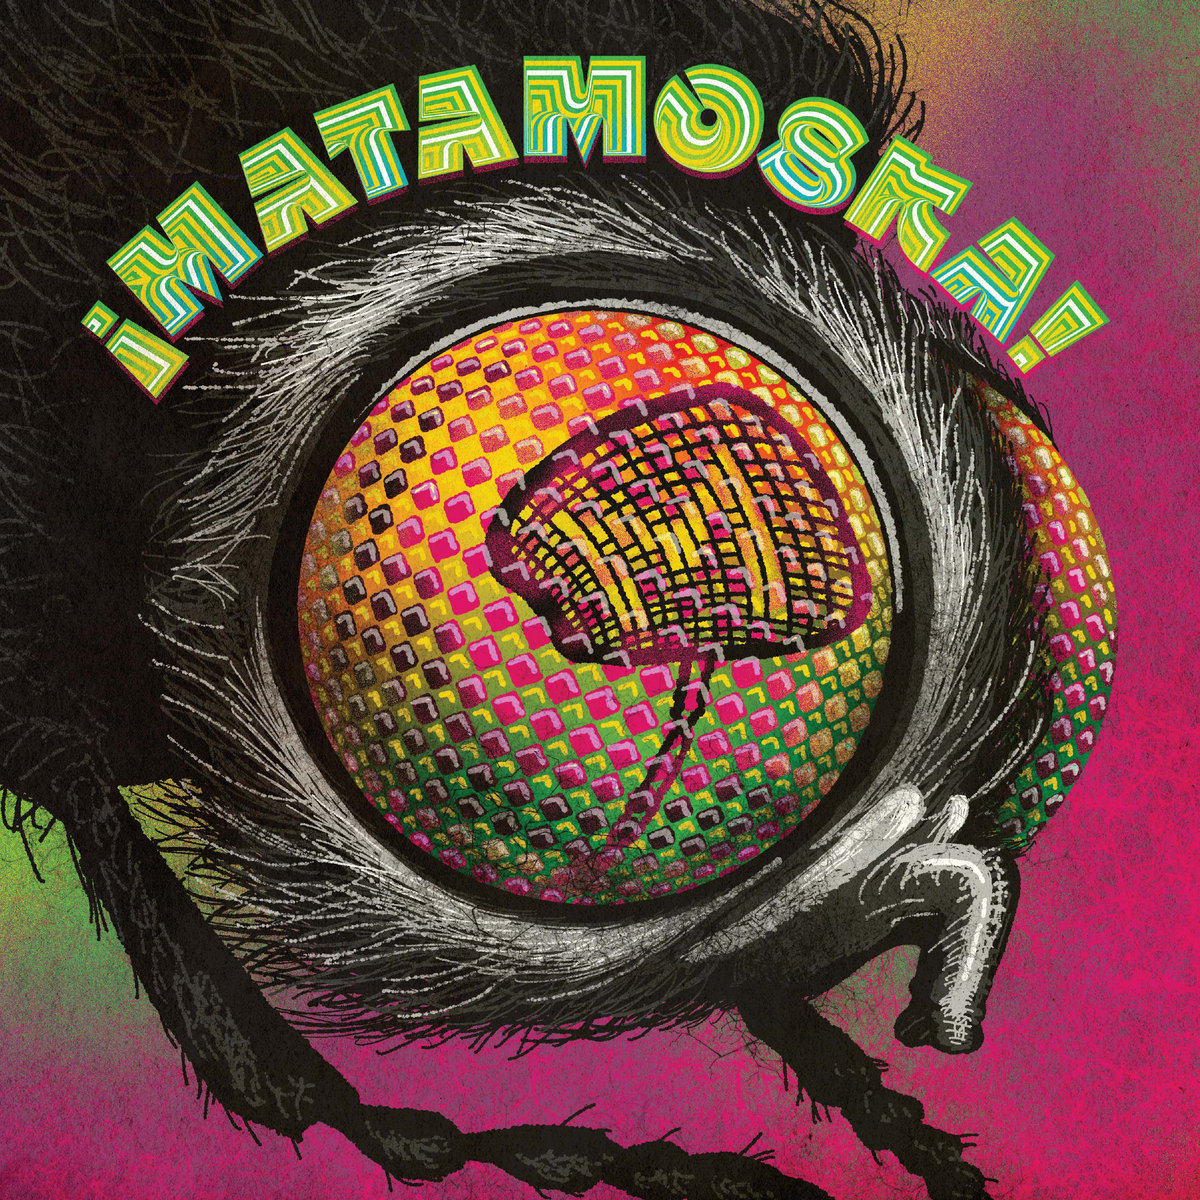 What do you think of the new Matamoska record? Favorite track?